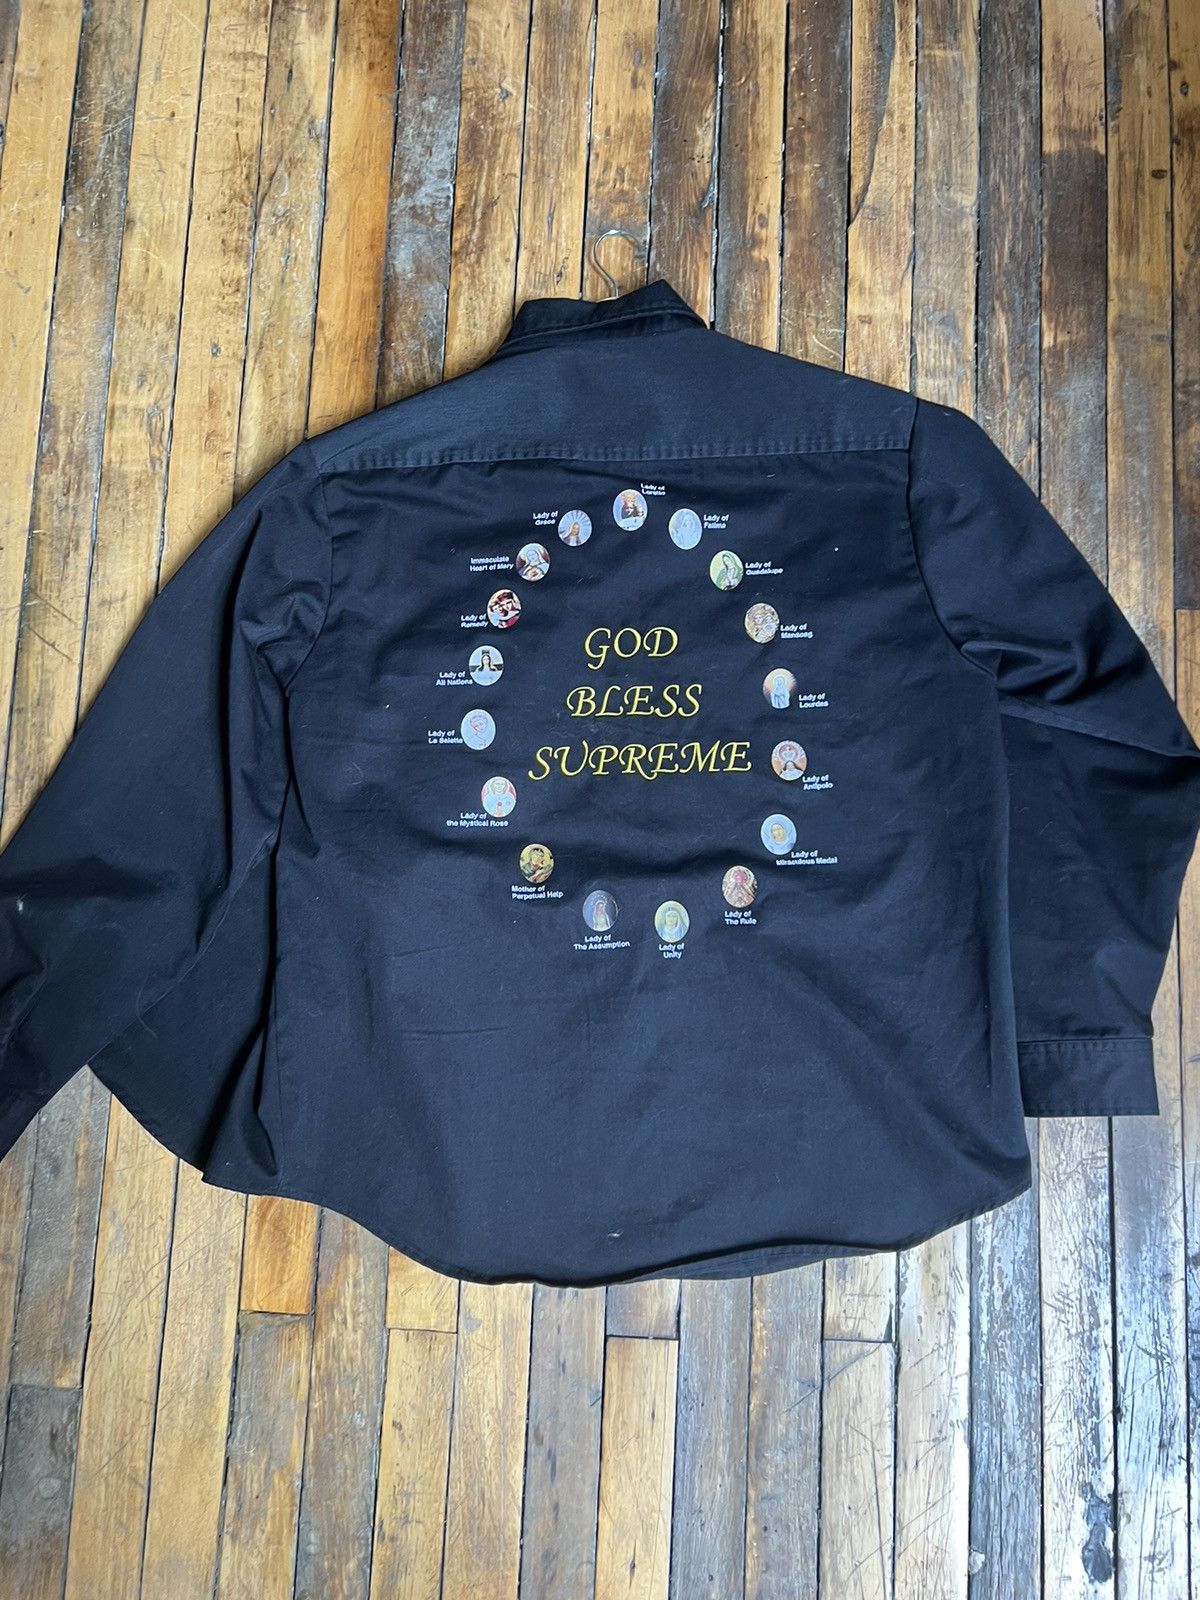 Supreme Our Lady Work Shirt | Grailed